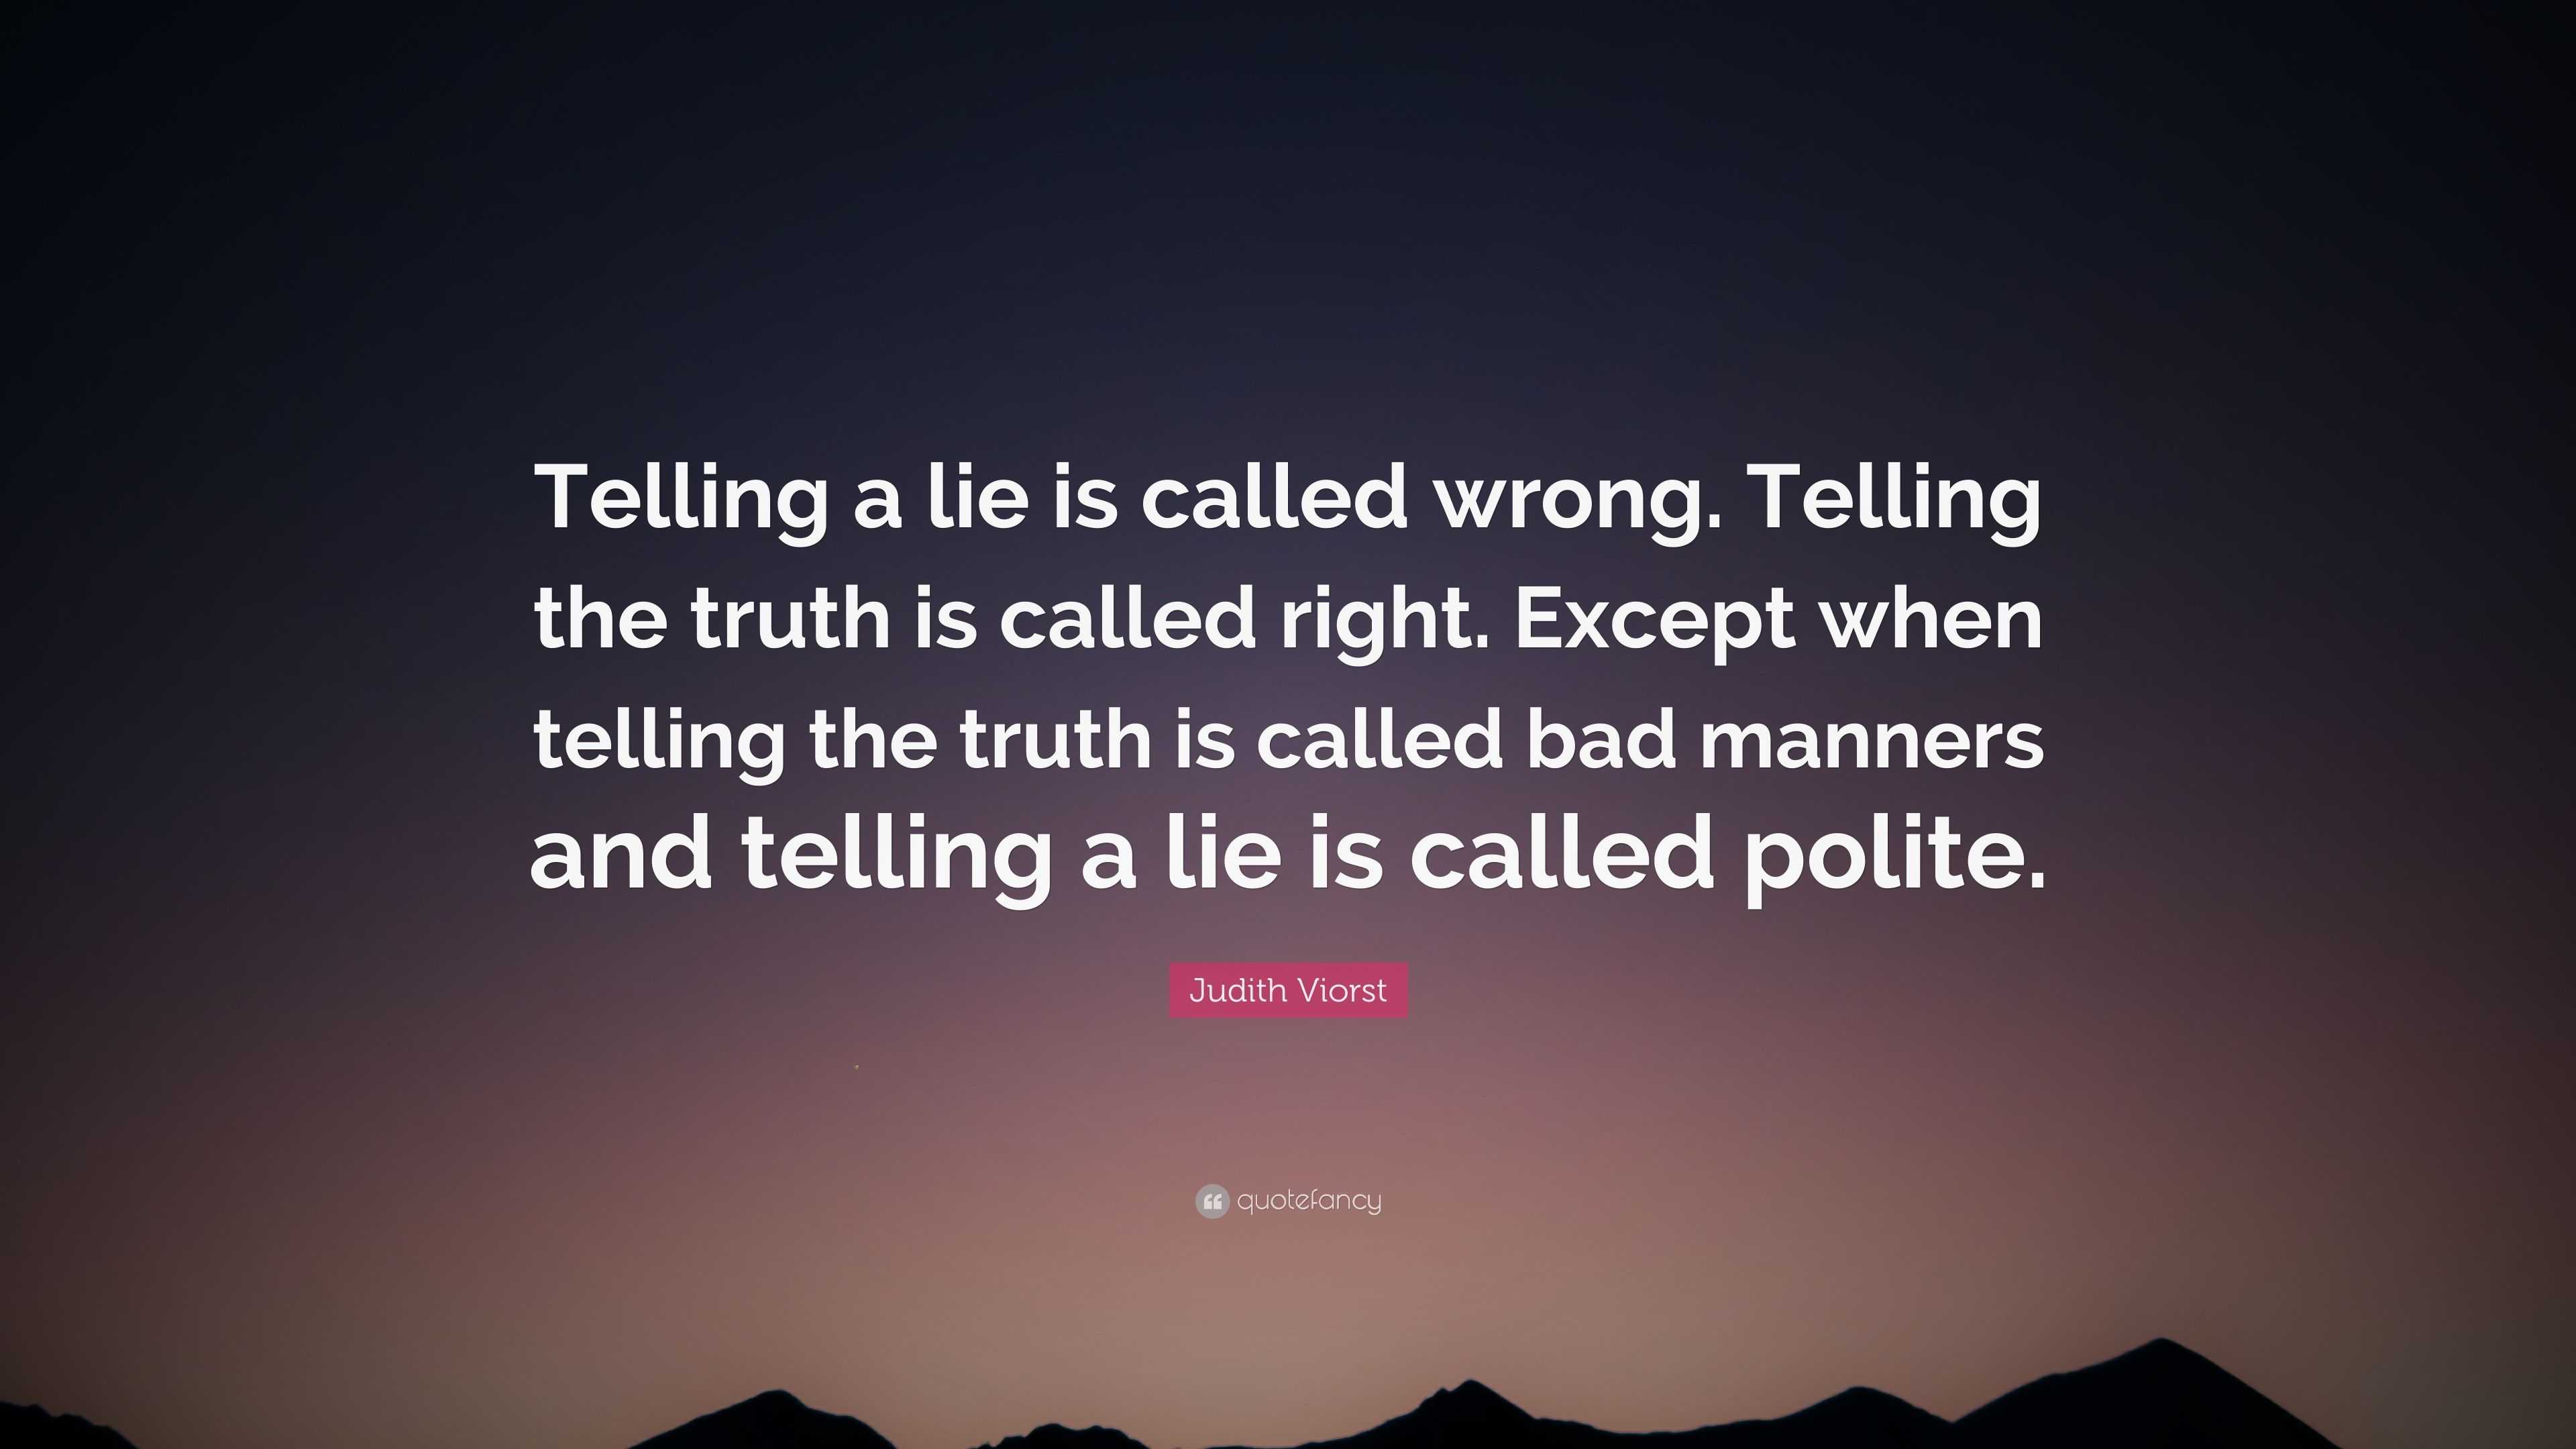 Judith Viorst Quote: “Telling a lie is called wrong. Telling the truth ...